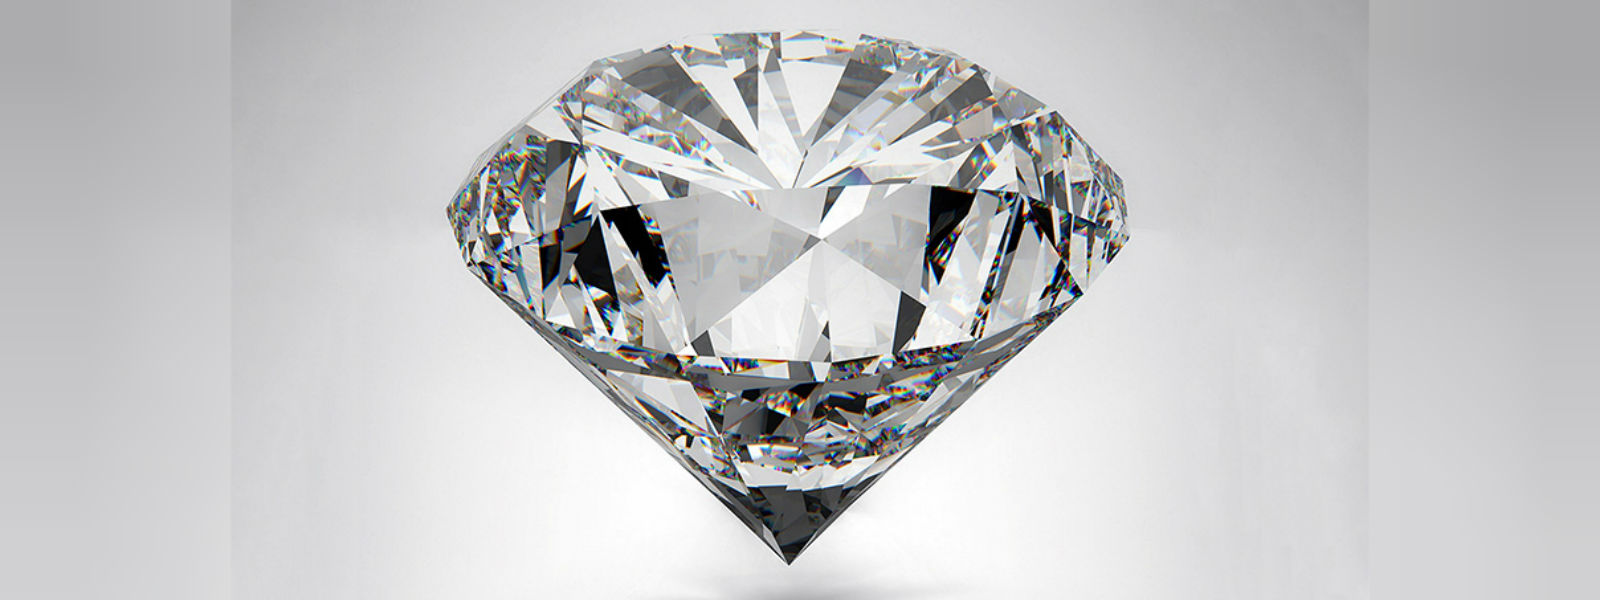 Rs.500mn Diamond; UoP Geological dept. to analyse 